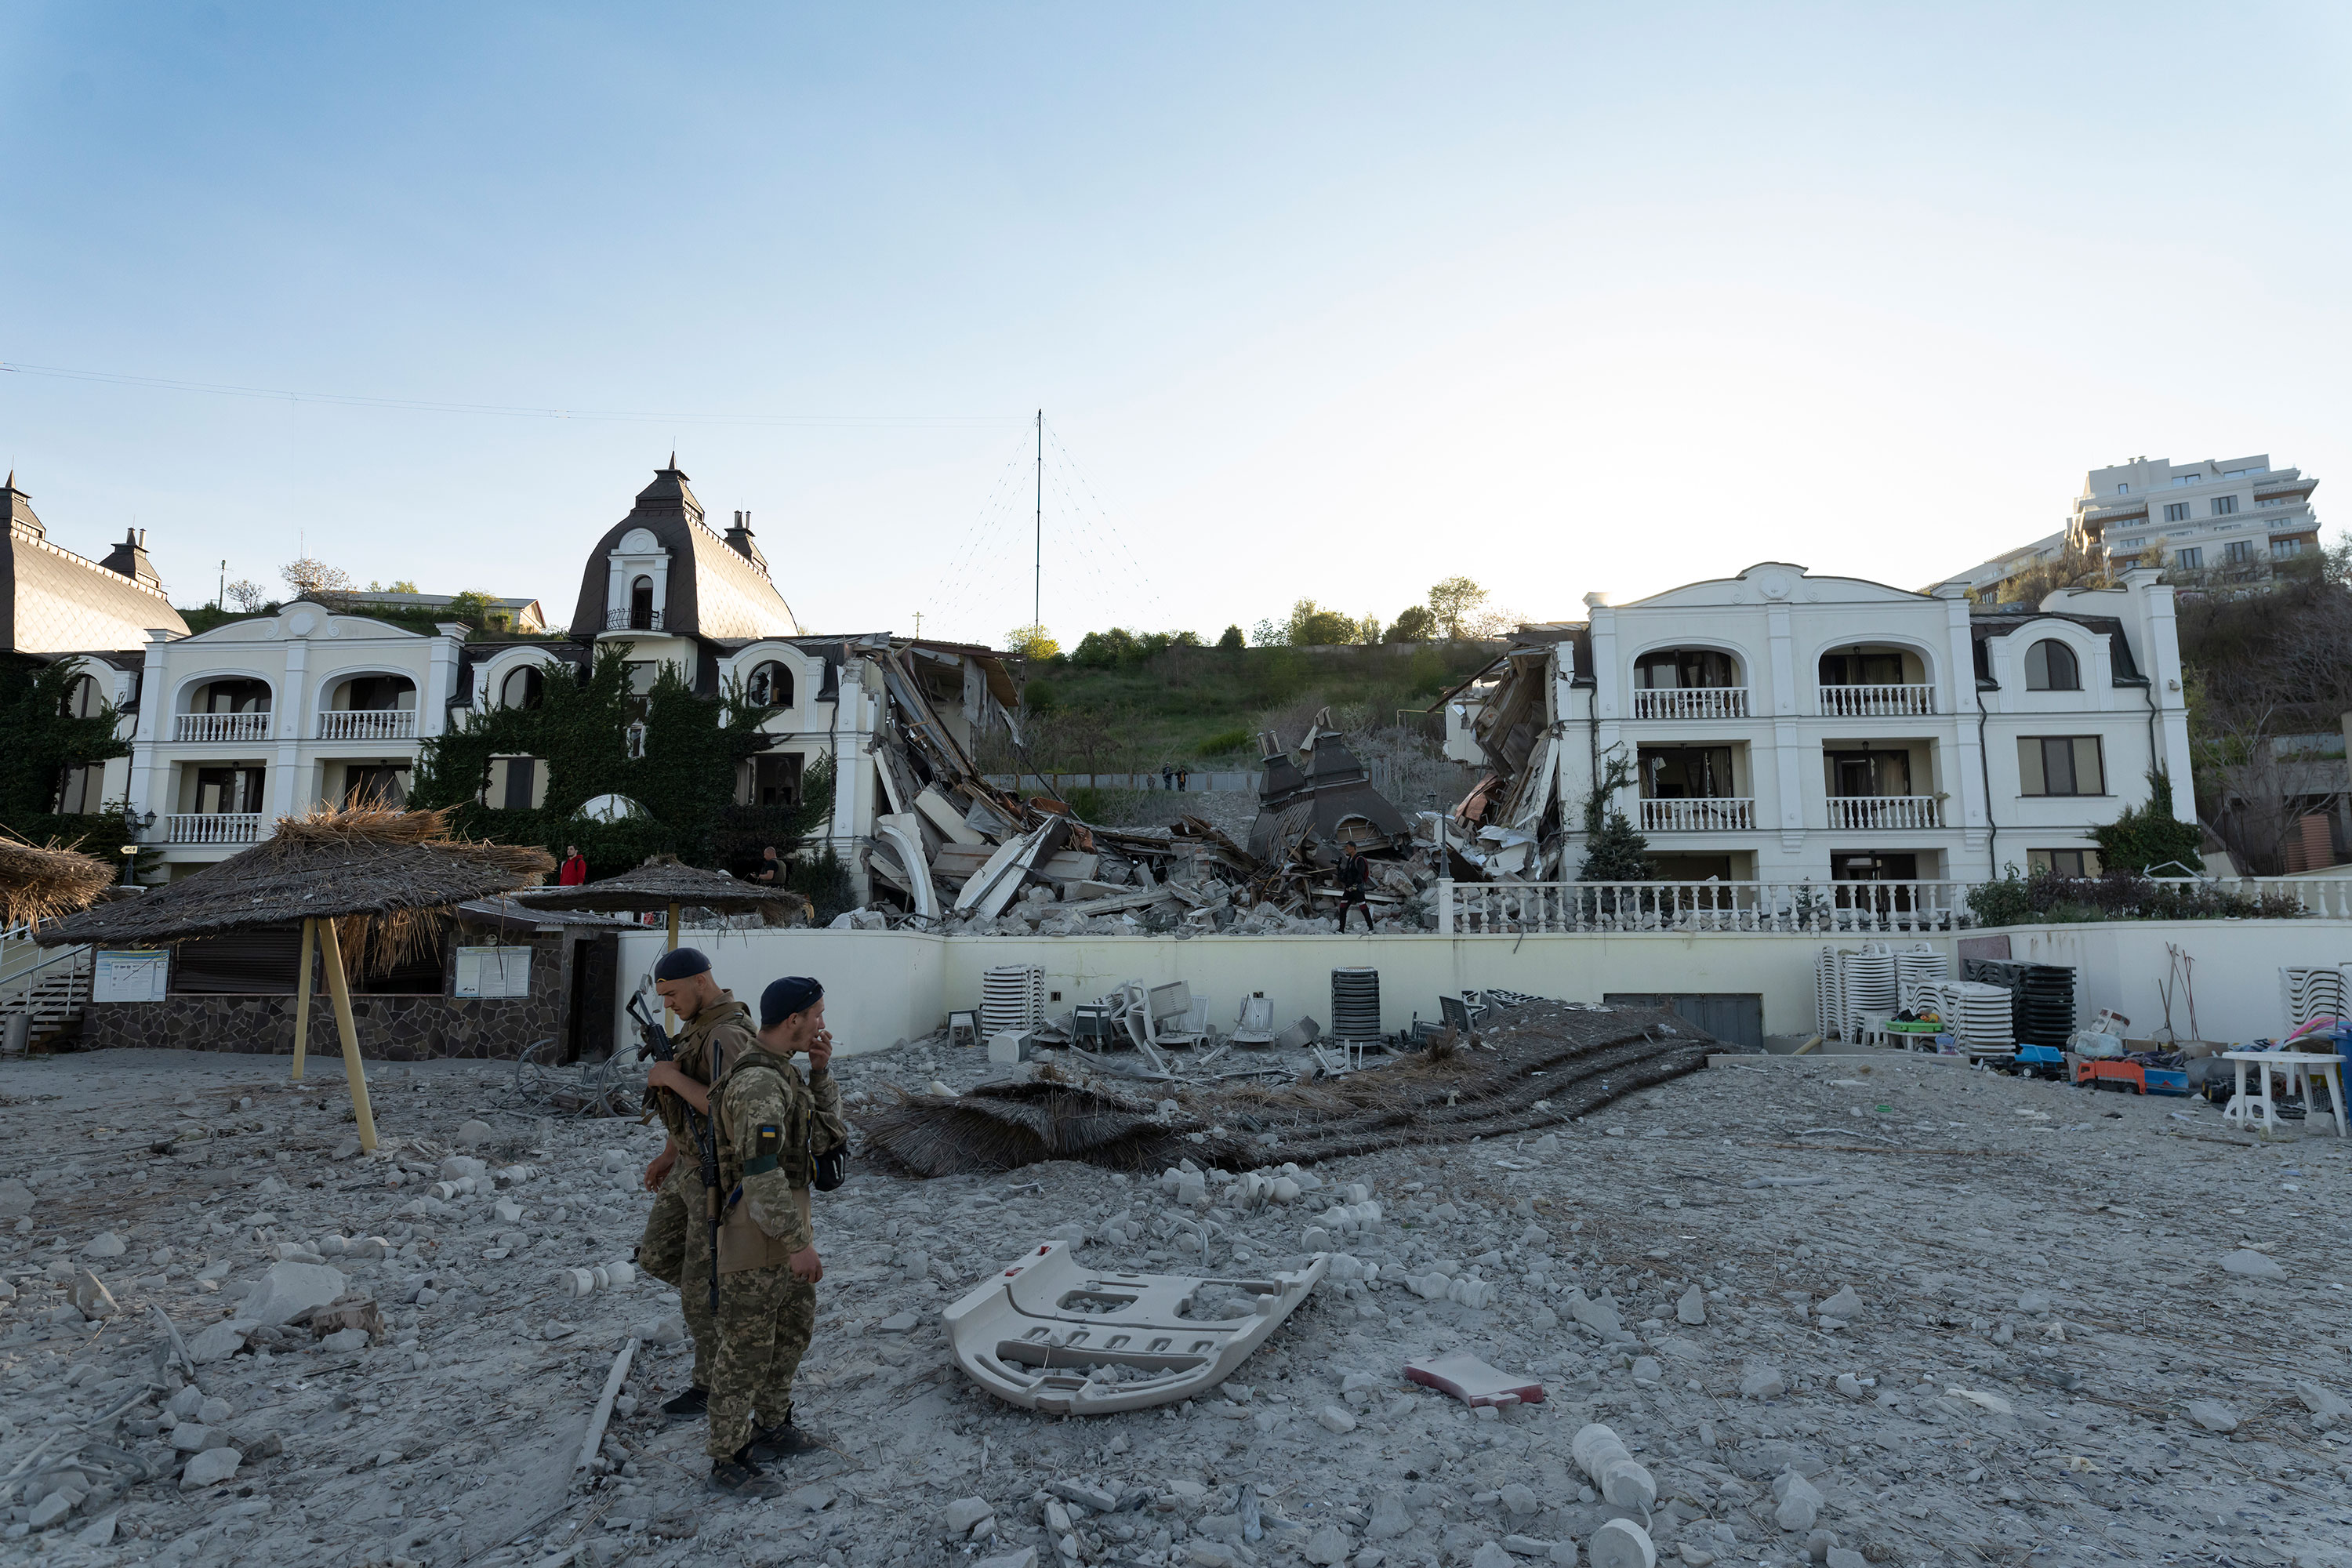 The Grande Pettine Hotel in Odesa, Ukraine, is seen on May 9 after it was struck by a Russian cruise missile.